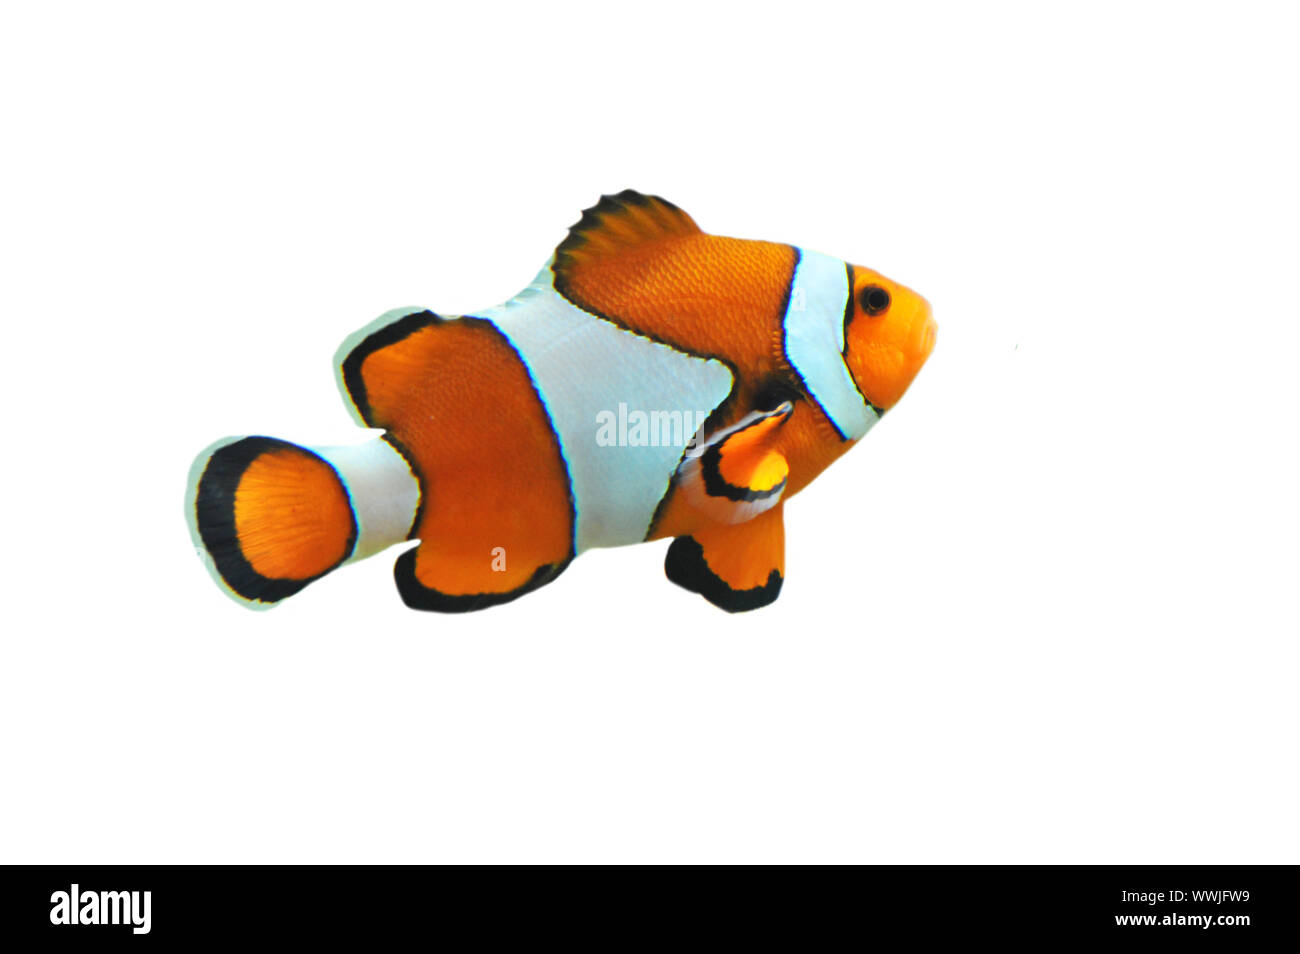 Clown fish isolated in white background (Amphiprion percula) Stock Photo